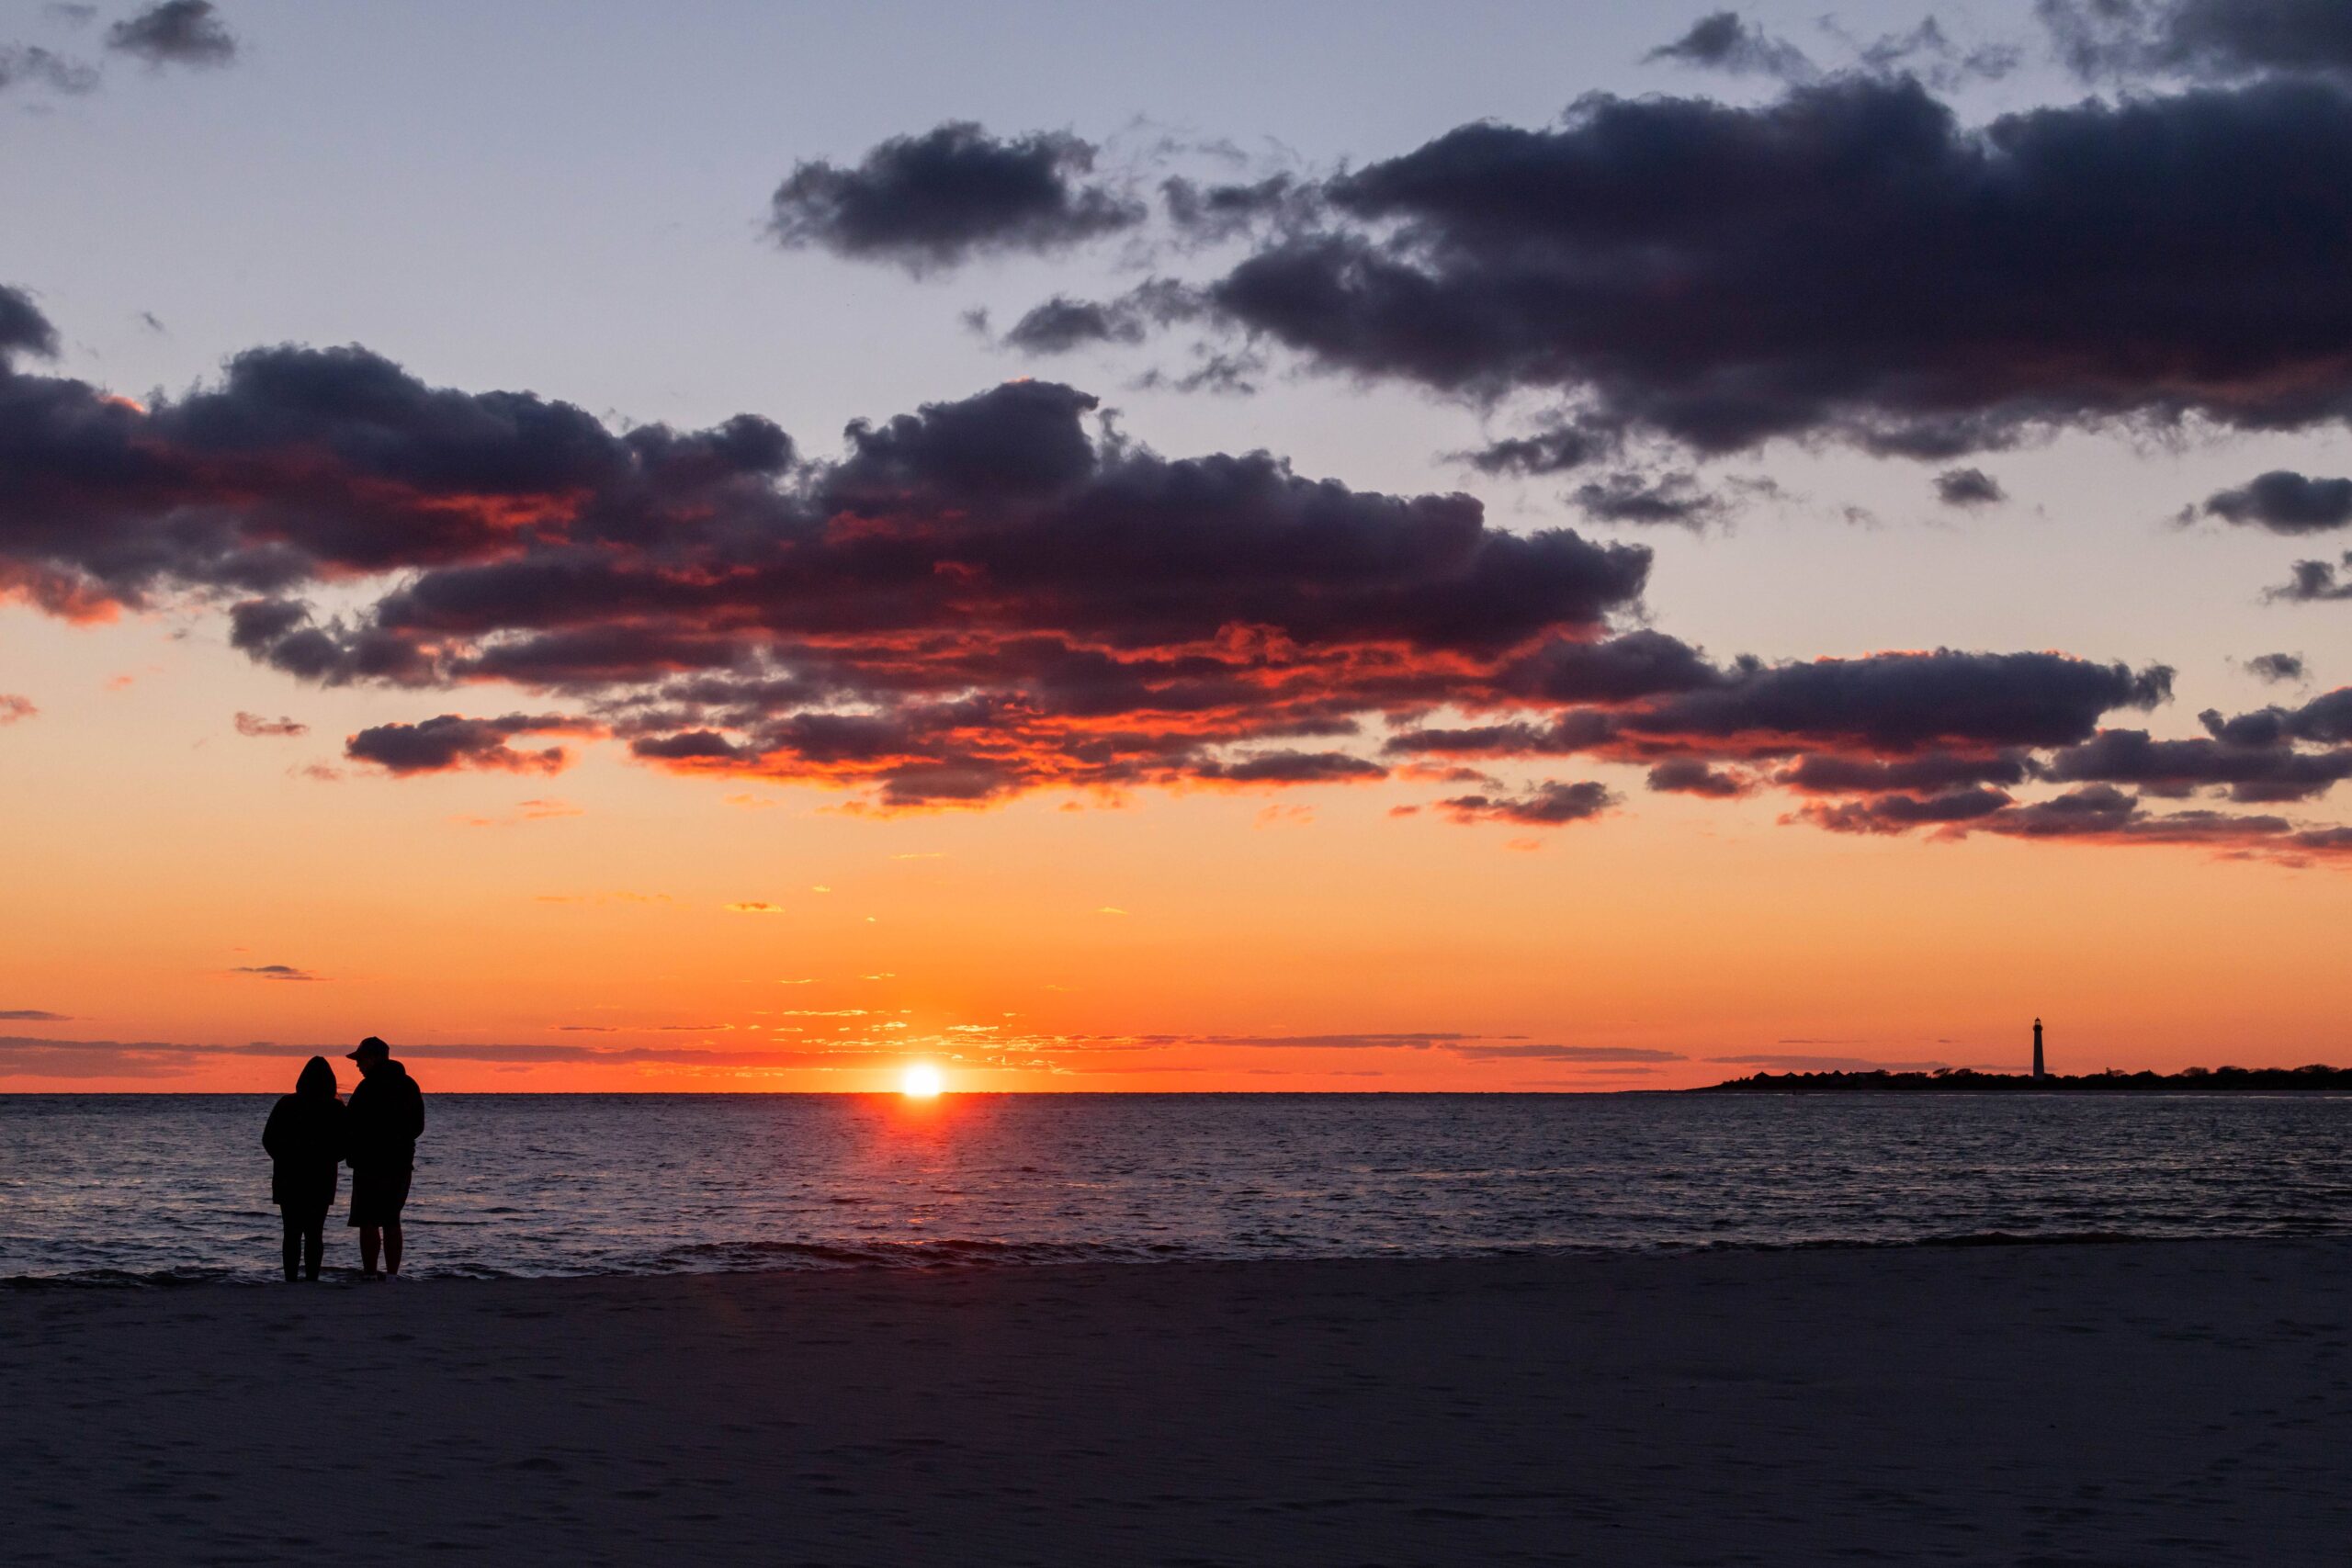 Two people silhouetted watching the sunset with purple and red clouds in the sky and the Cape May lighthouse in the distance